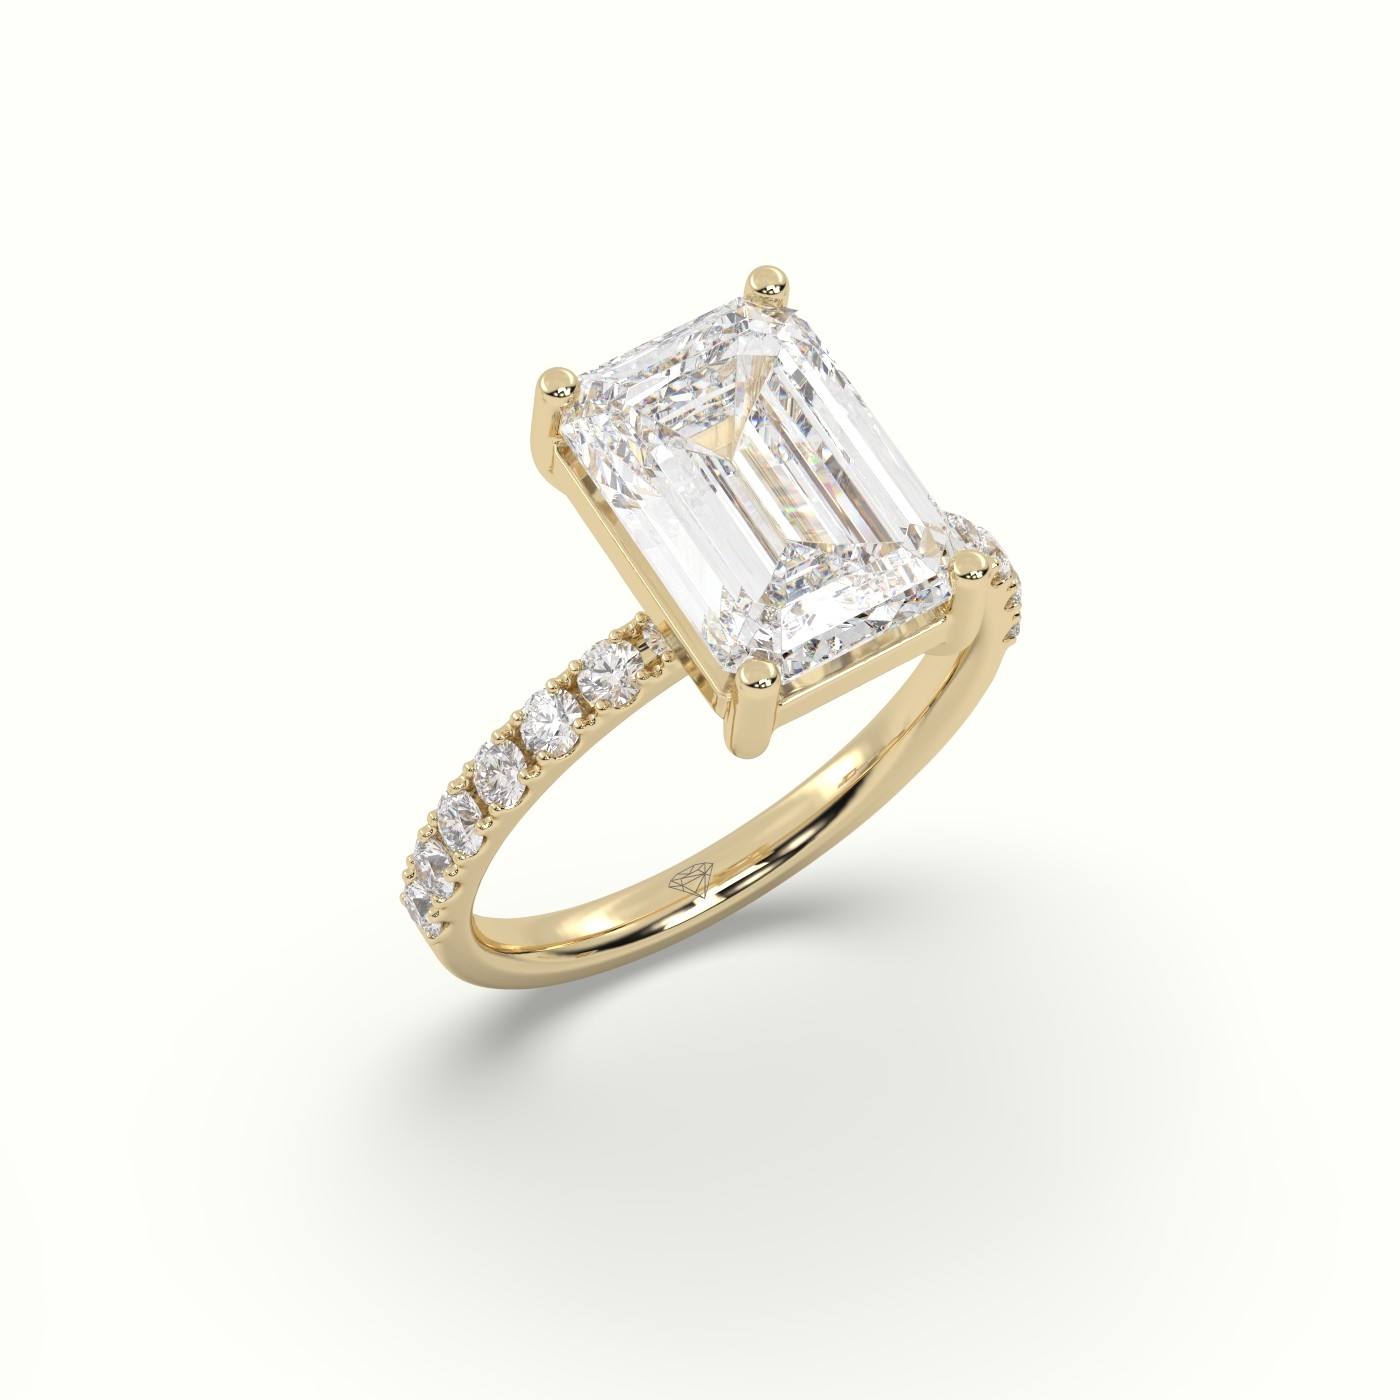 18K YELLOW GOLD Emerald Cut Diamond Engagement Ring with Pave Band